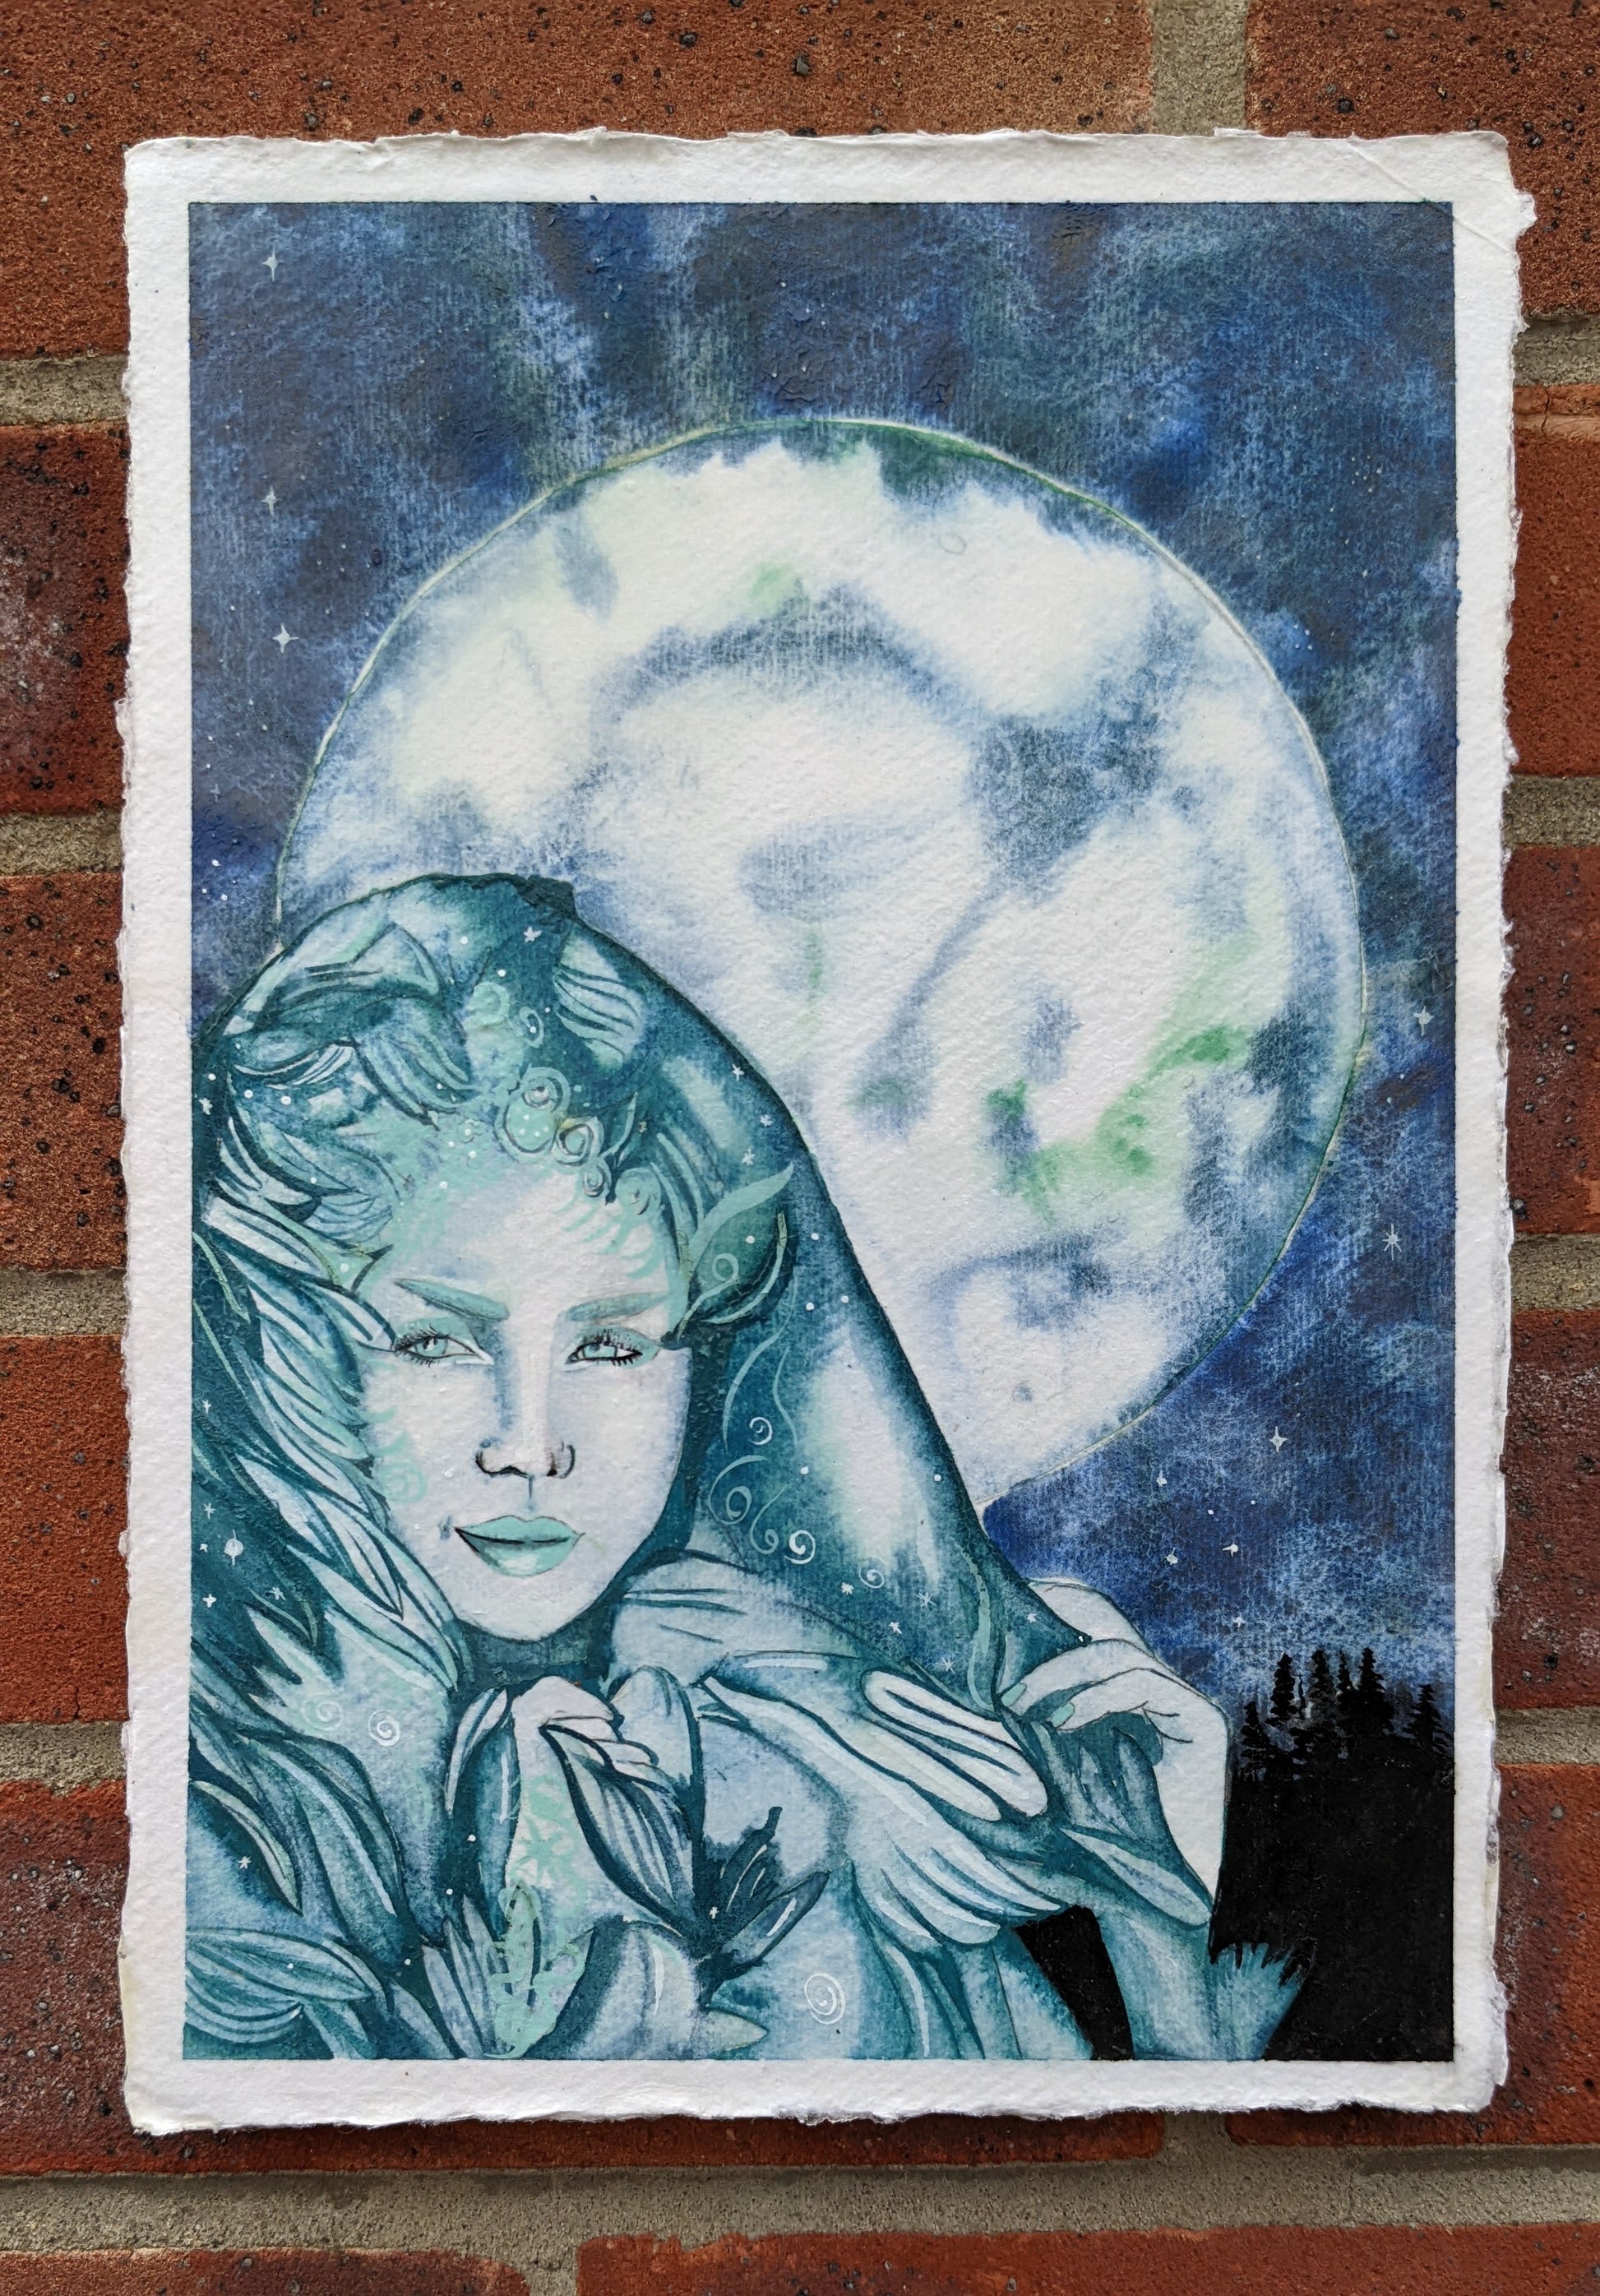 The Snow Queen, an original painting based on the original story by hans christian anderson, and illustrative image with a full moon